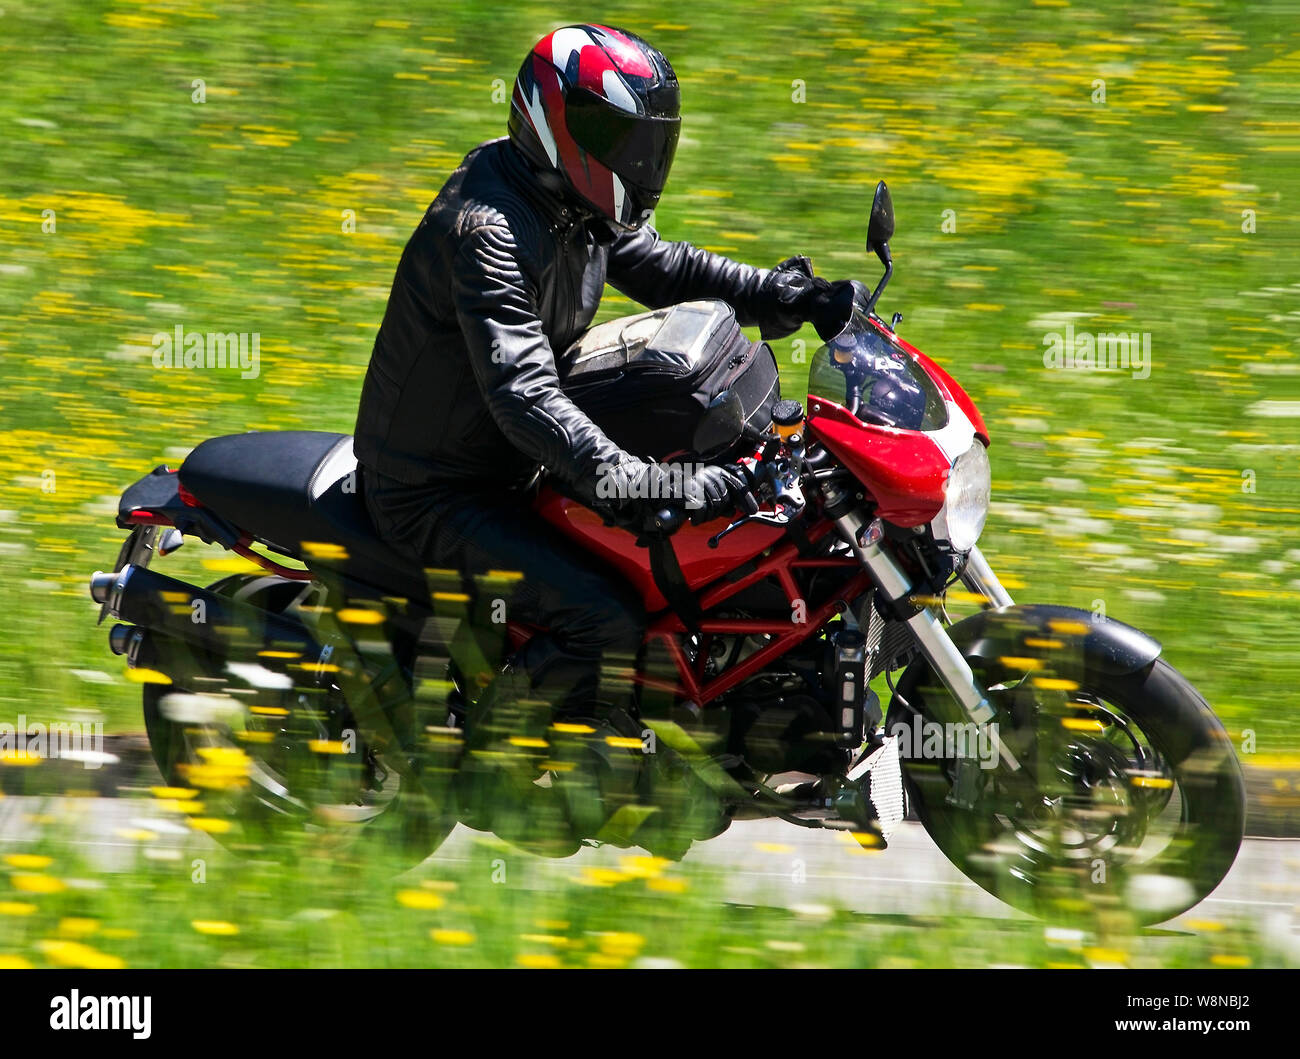 Motorcycling in summer in wonderful places in nature. Stock Photo